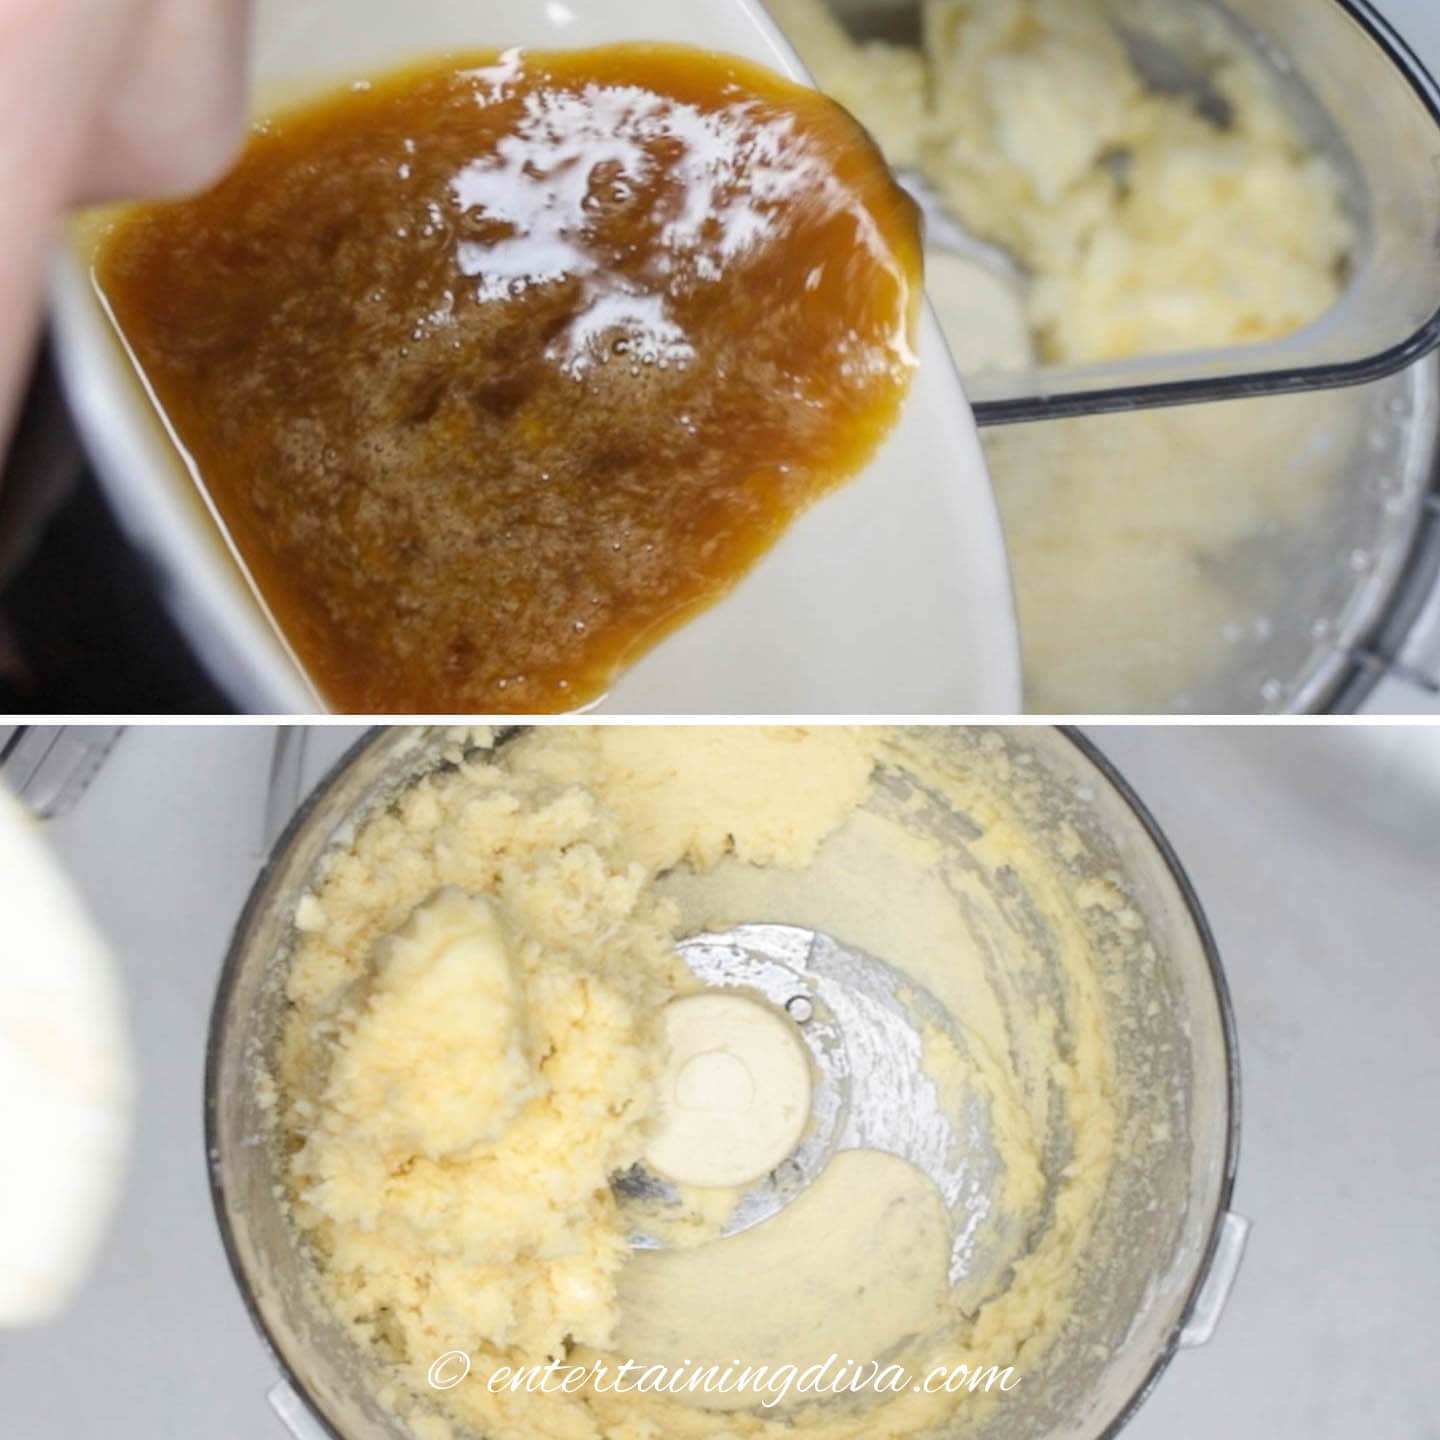 Egg mixture being added and processed